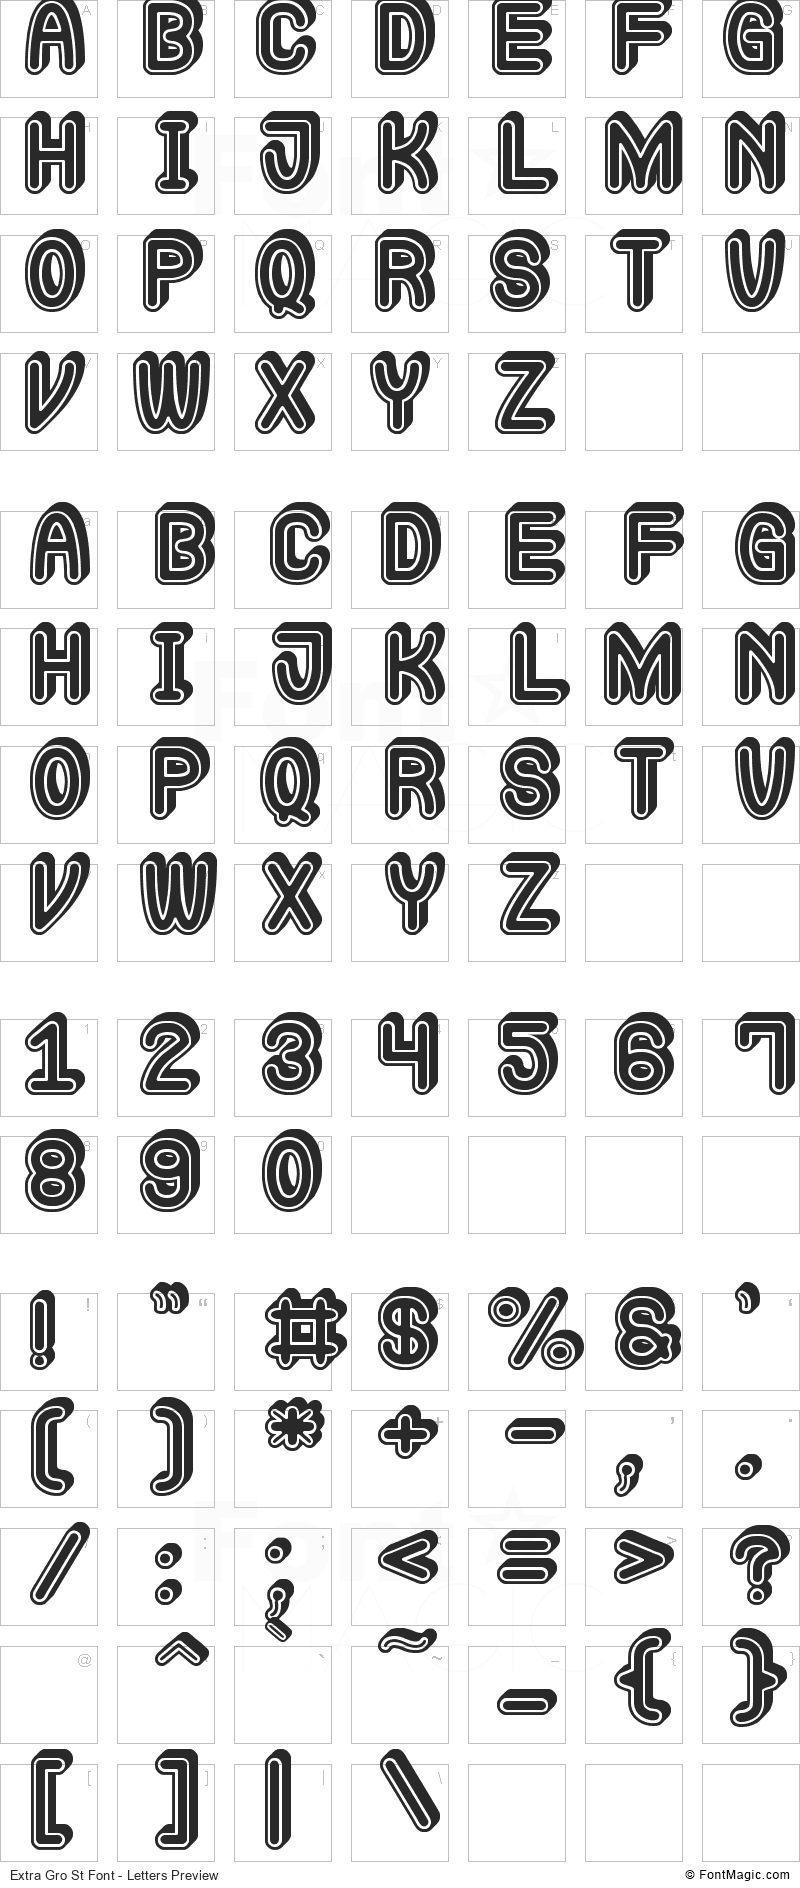 Extra Gro St Font - All Latters Preview Chart